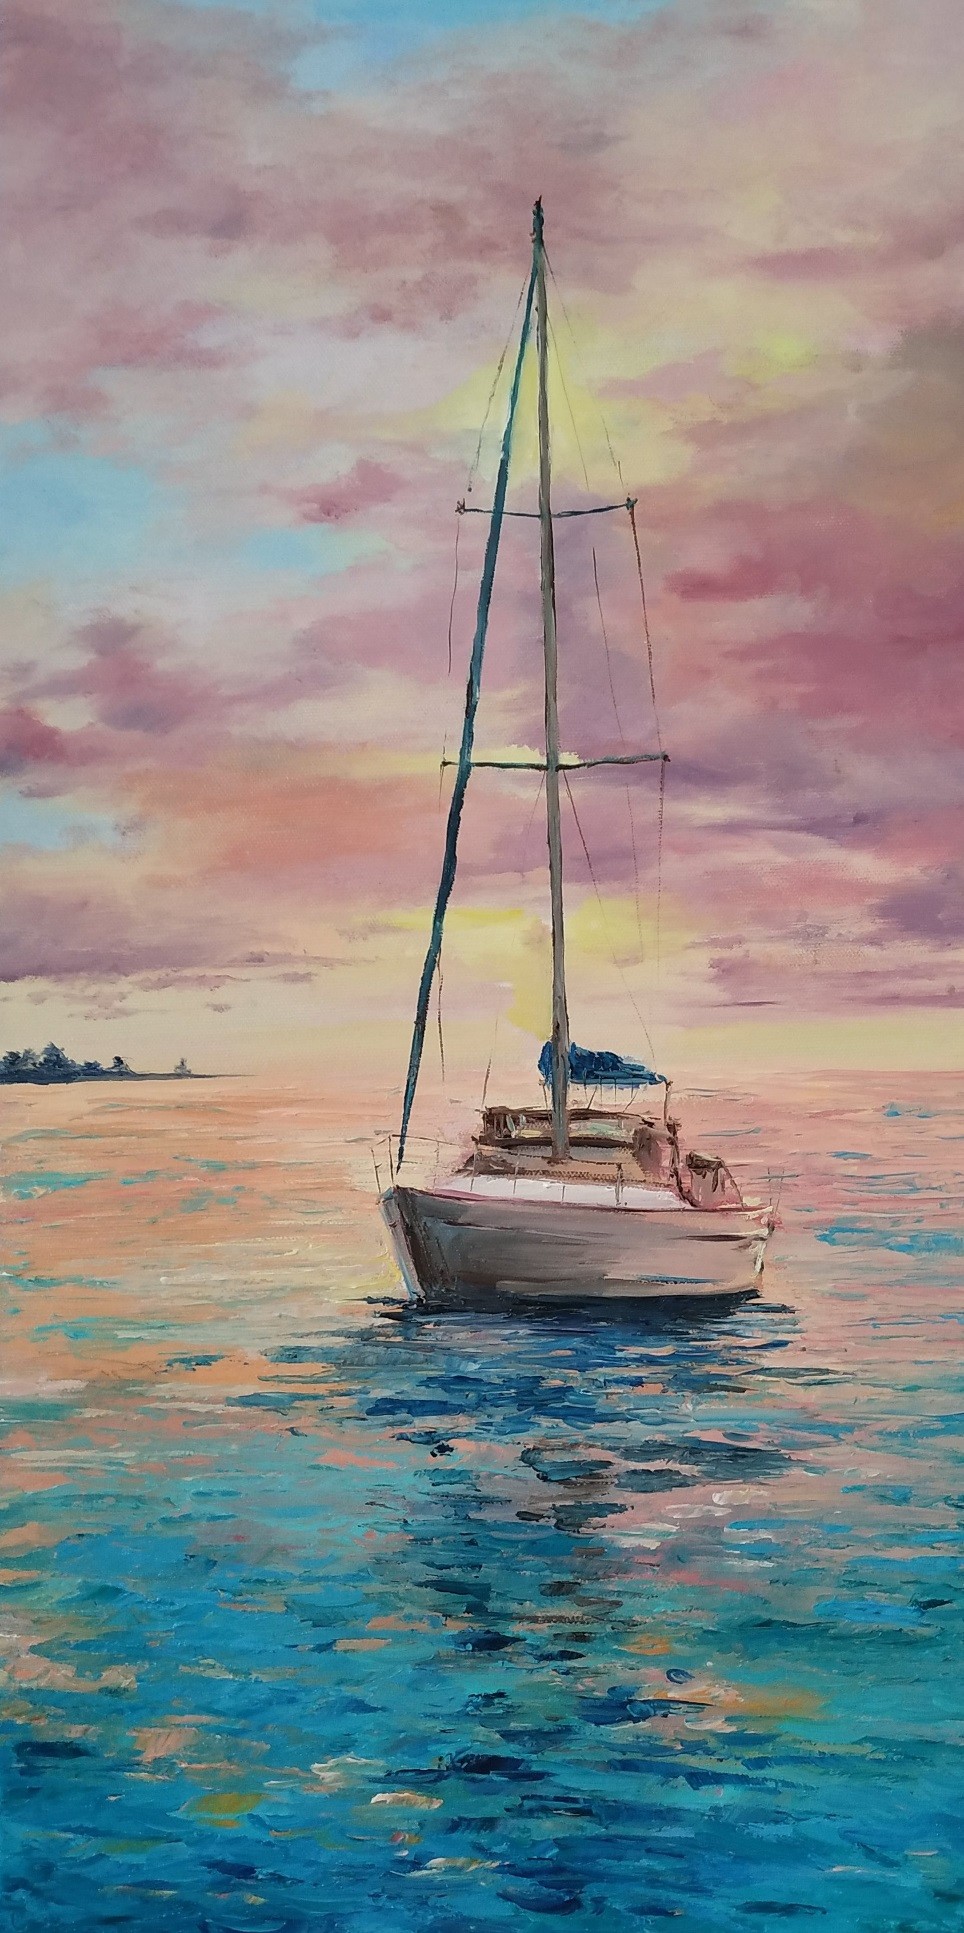 Coastal wall art Boat seascape 23 by 31 inches